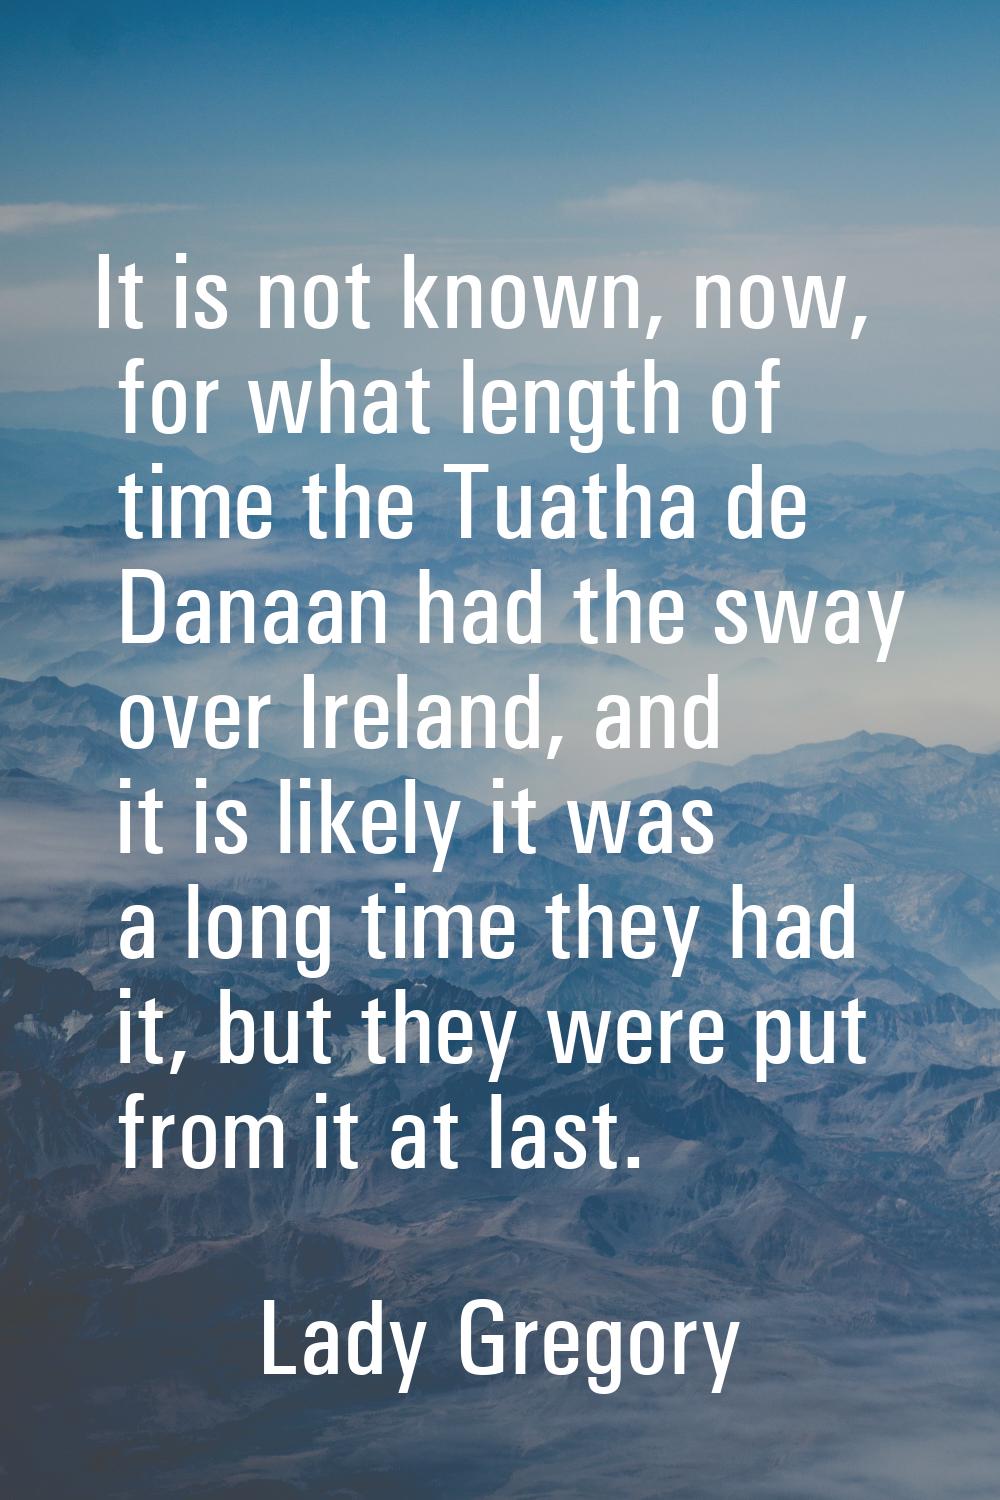 It is not known, now, for what length of time the Tuatha de Danaan had the sway over Ireland, and i